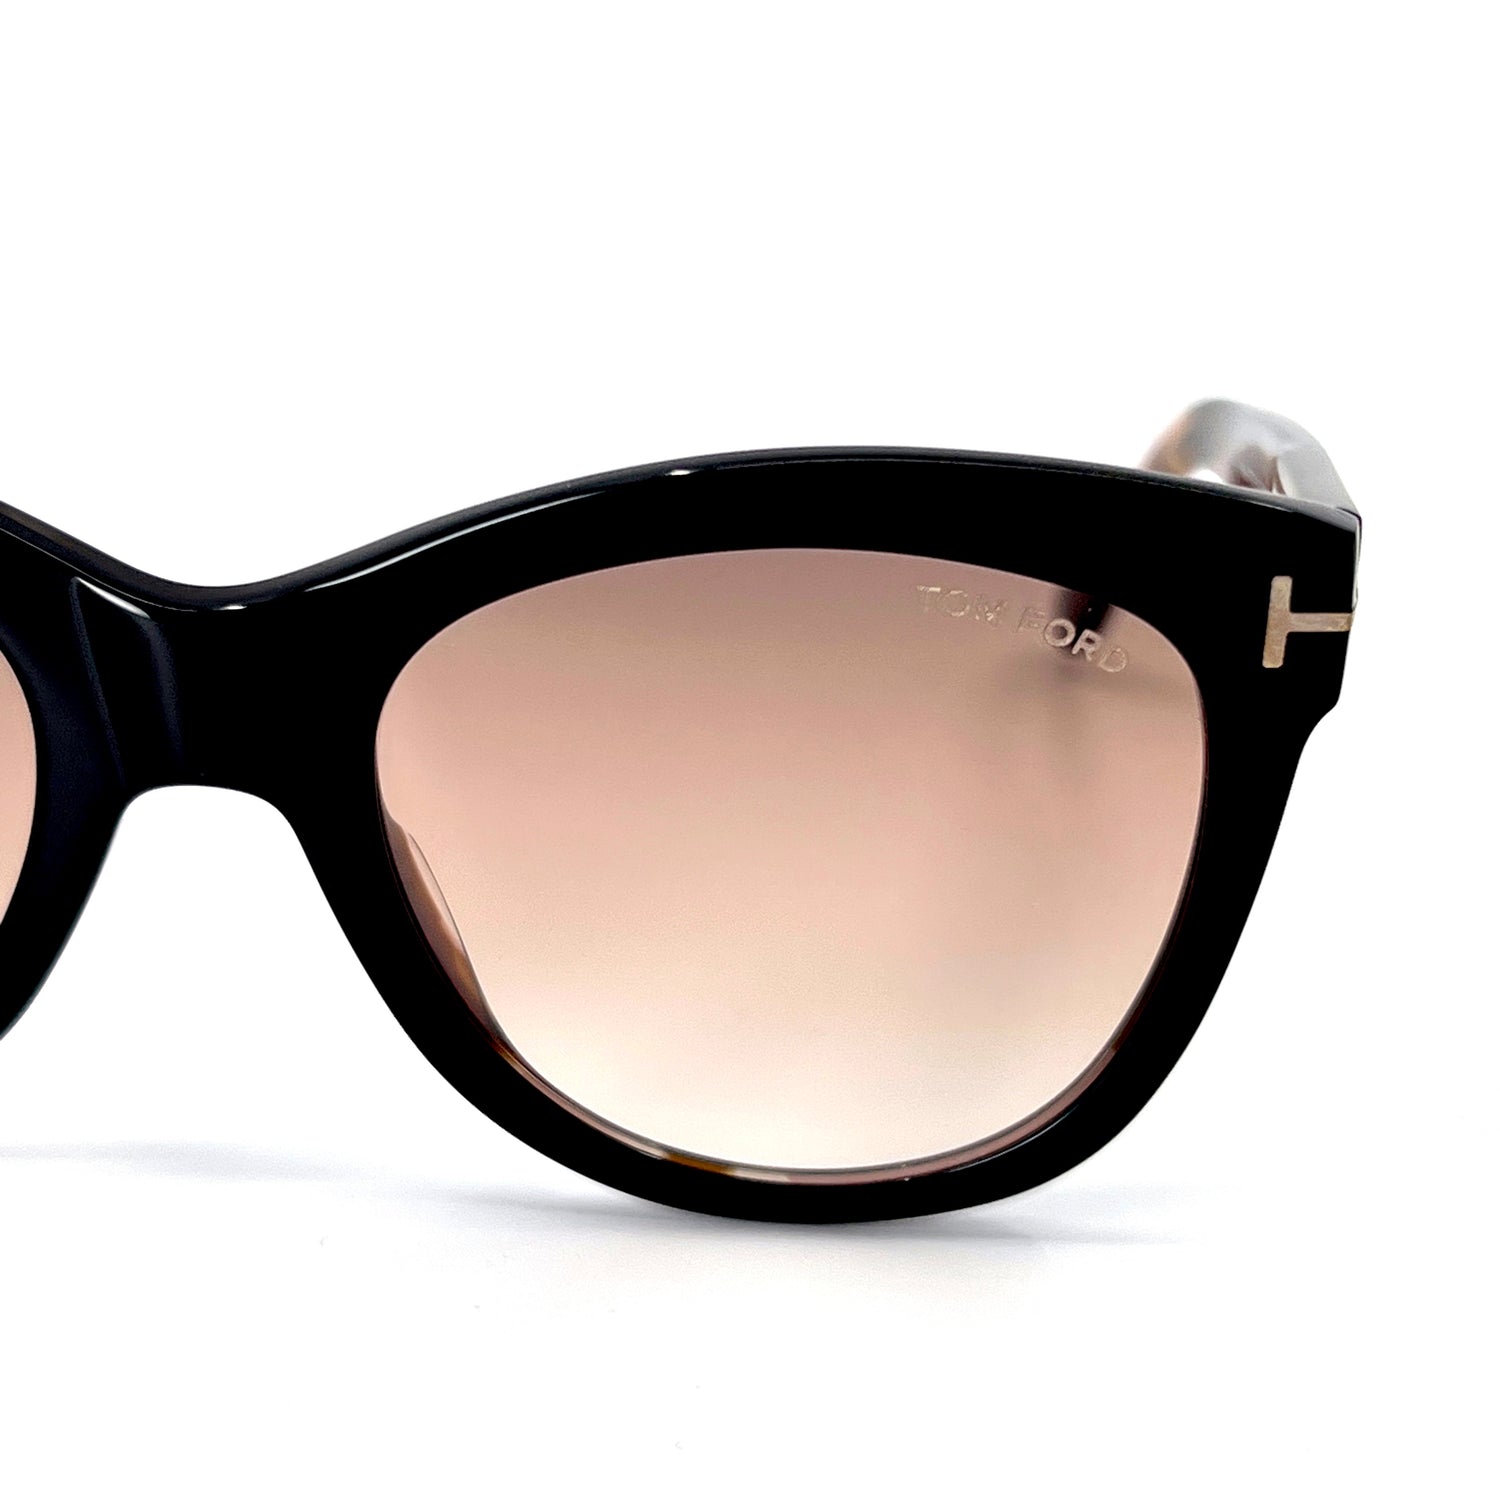 NEW!!! TOM FORD Wallace Sunglasses TF870 05F Authentic